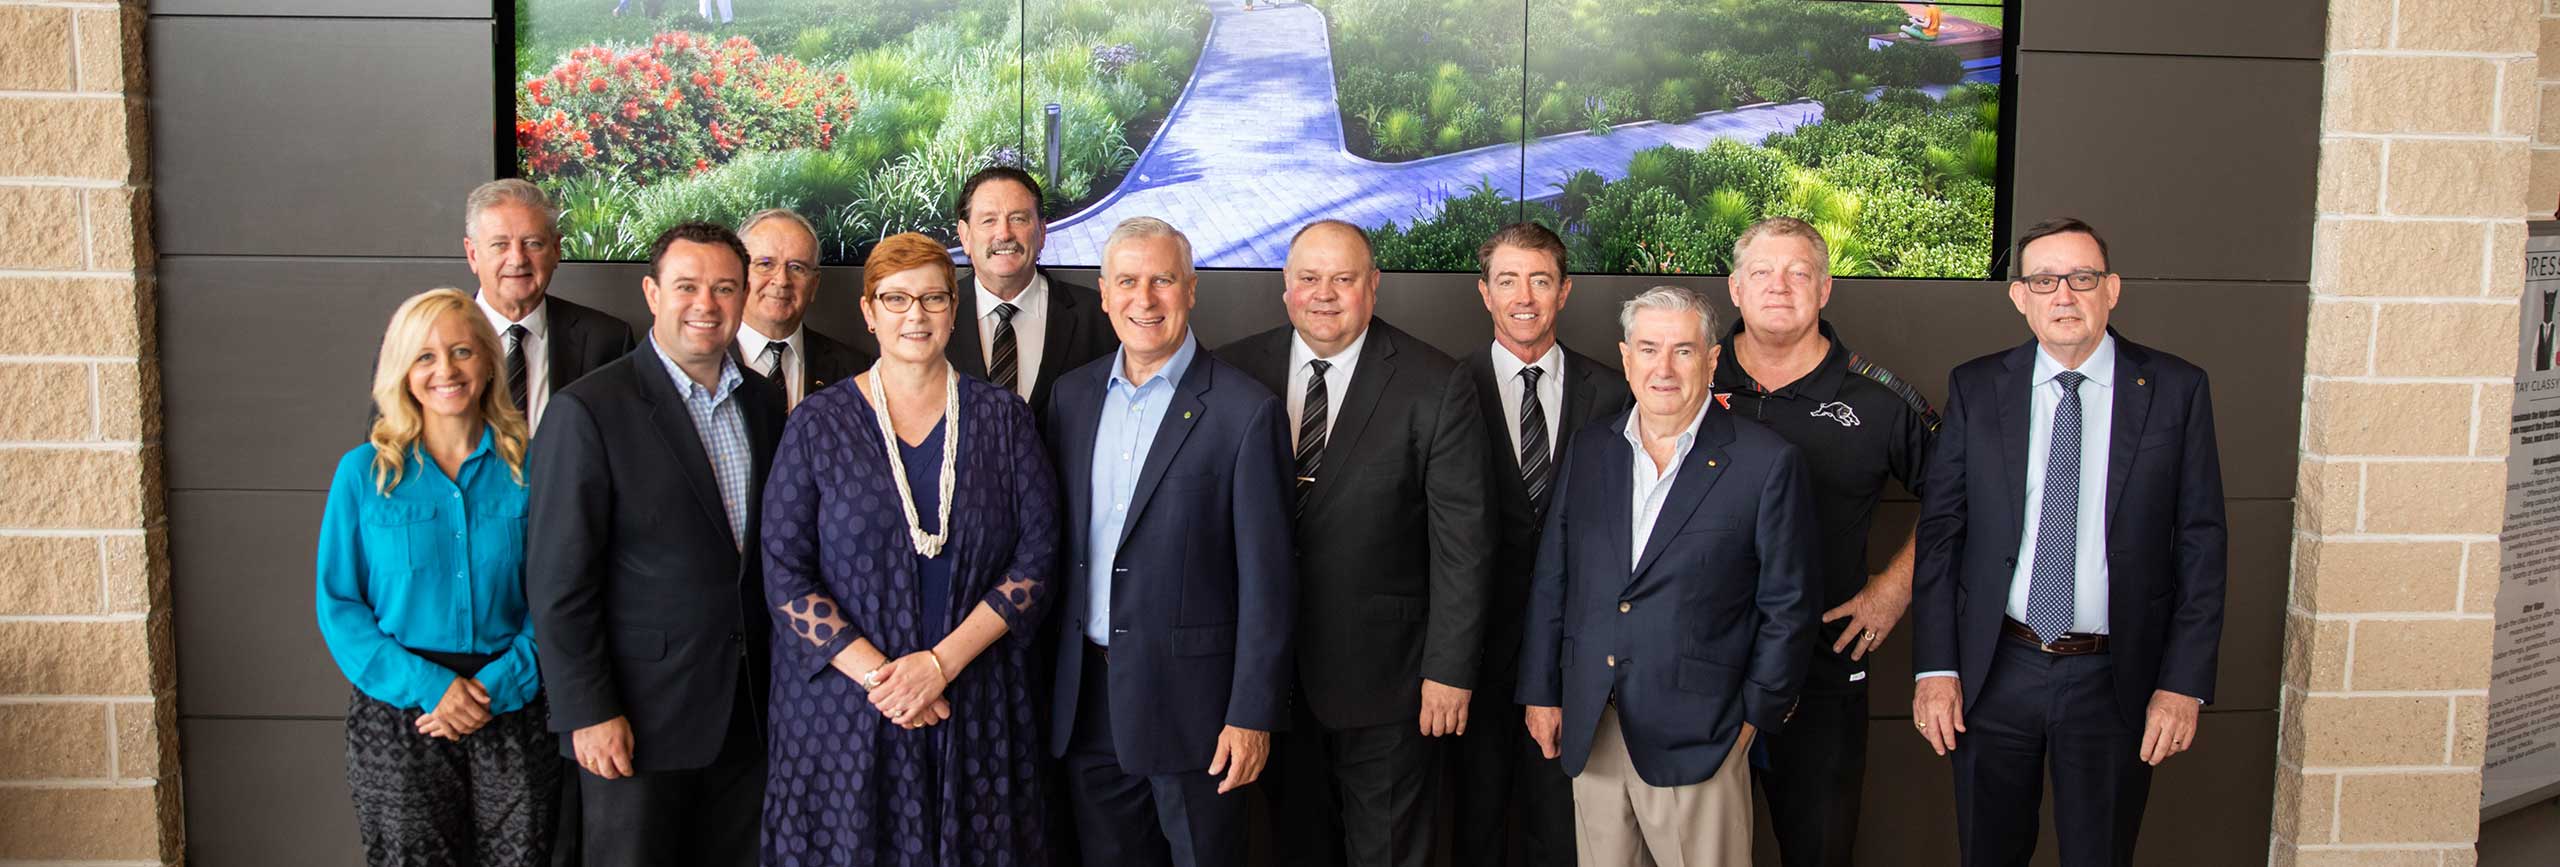 Penrith Mayor Ross Fowler OAM joined Federal and State Government representatives and Panthers Board members and CEO at the announcement of the Western Sydney Community and Convention Centre